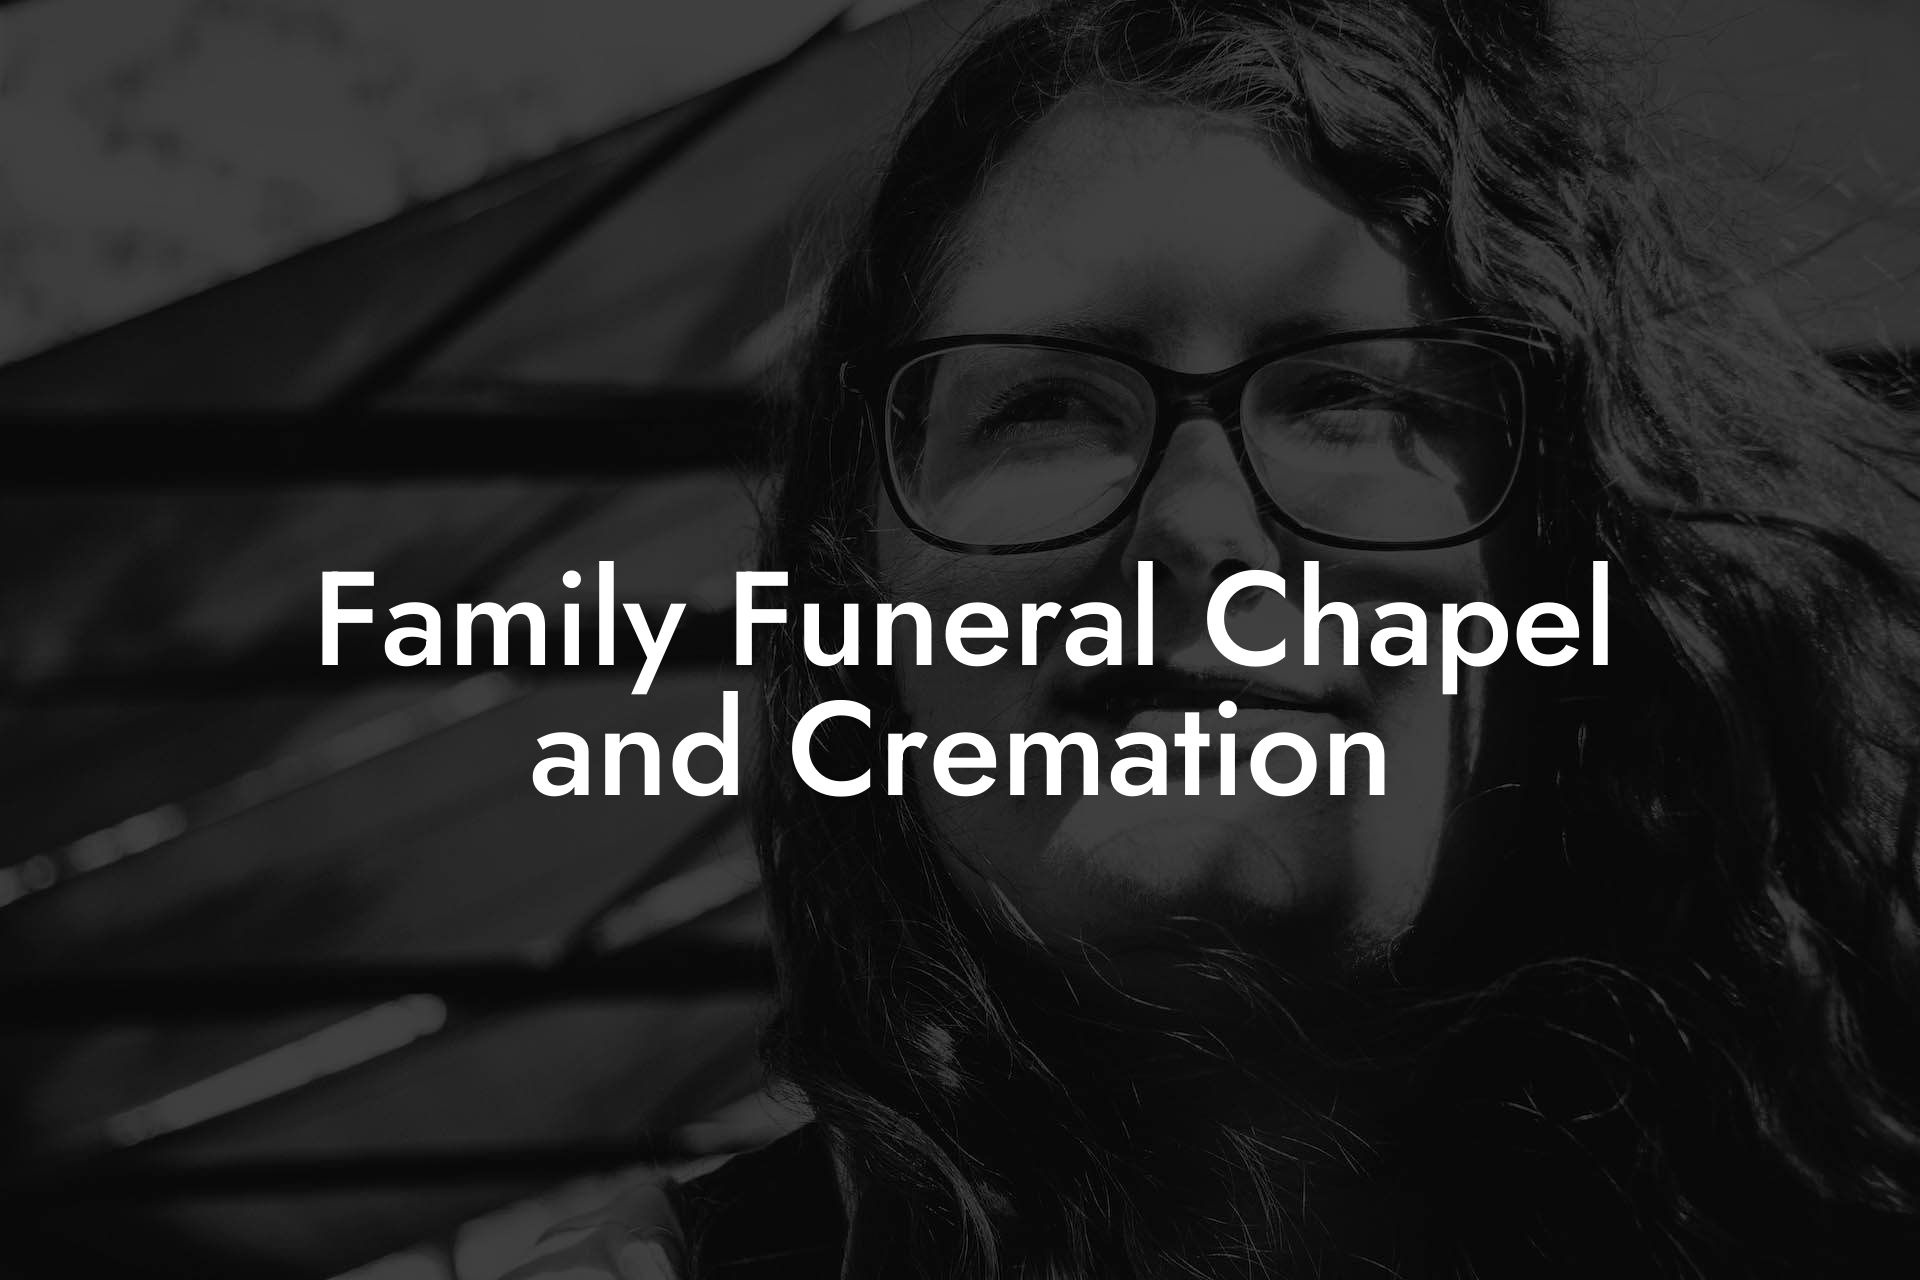 Family Funeral Chapel and Cremation